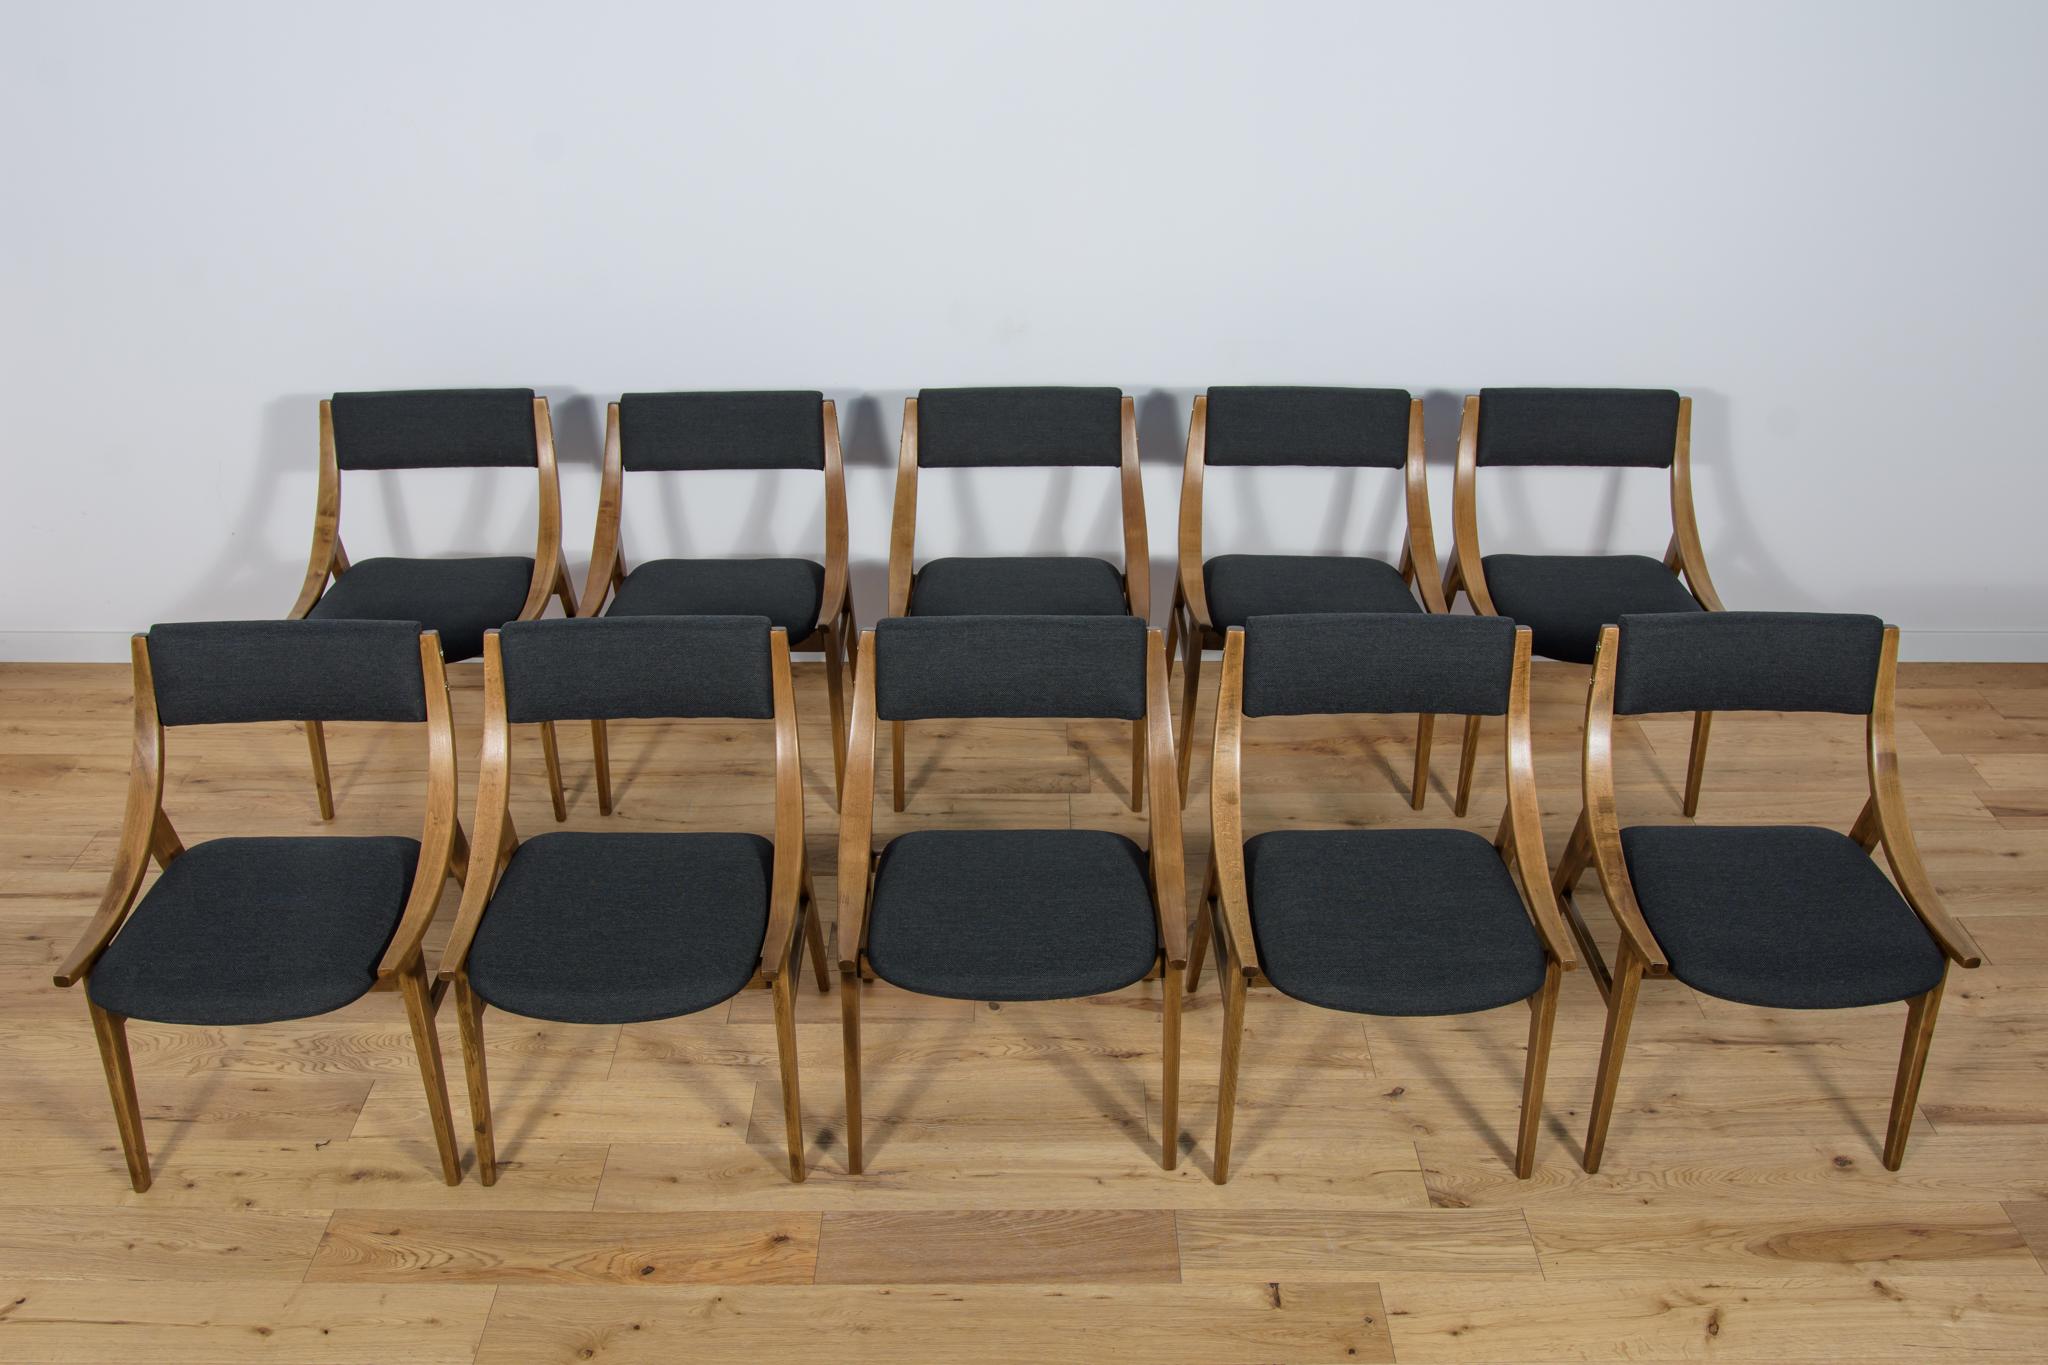 
This set of ten dining chairs was produced by Zamojska Furniture Factory in Poland circa 1970. It was designed by Juliusz Kędziorek. Completely restored. The sponges have been replaced. The seats have been reupholstered with new black fabric. The